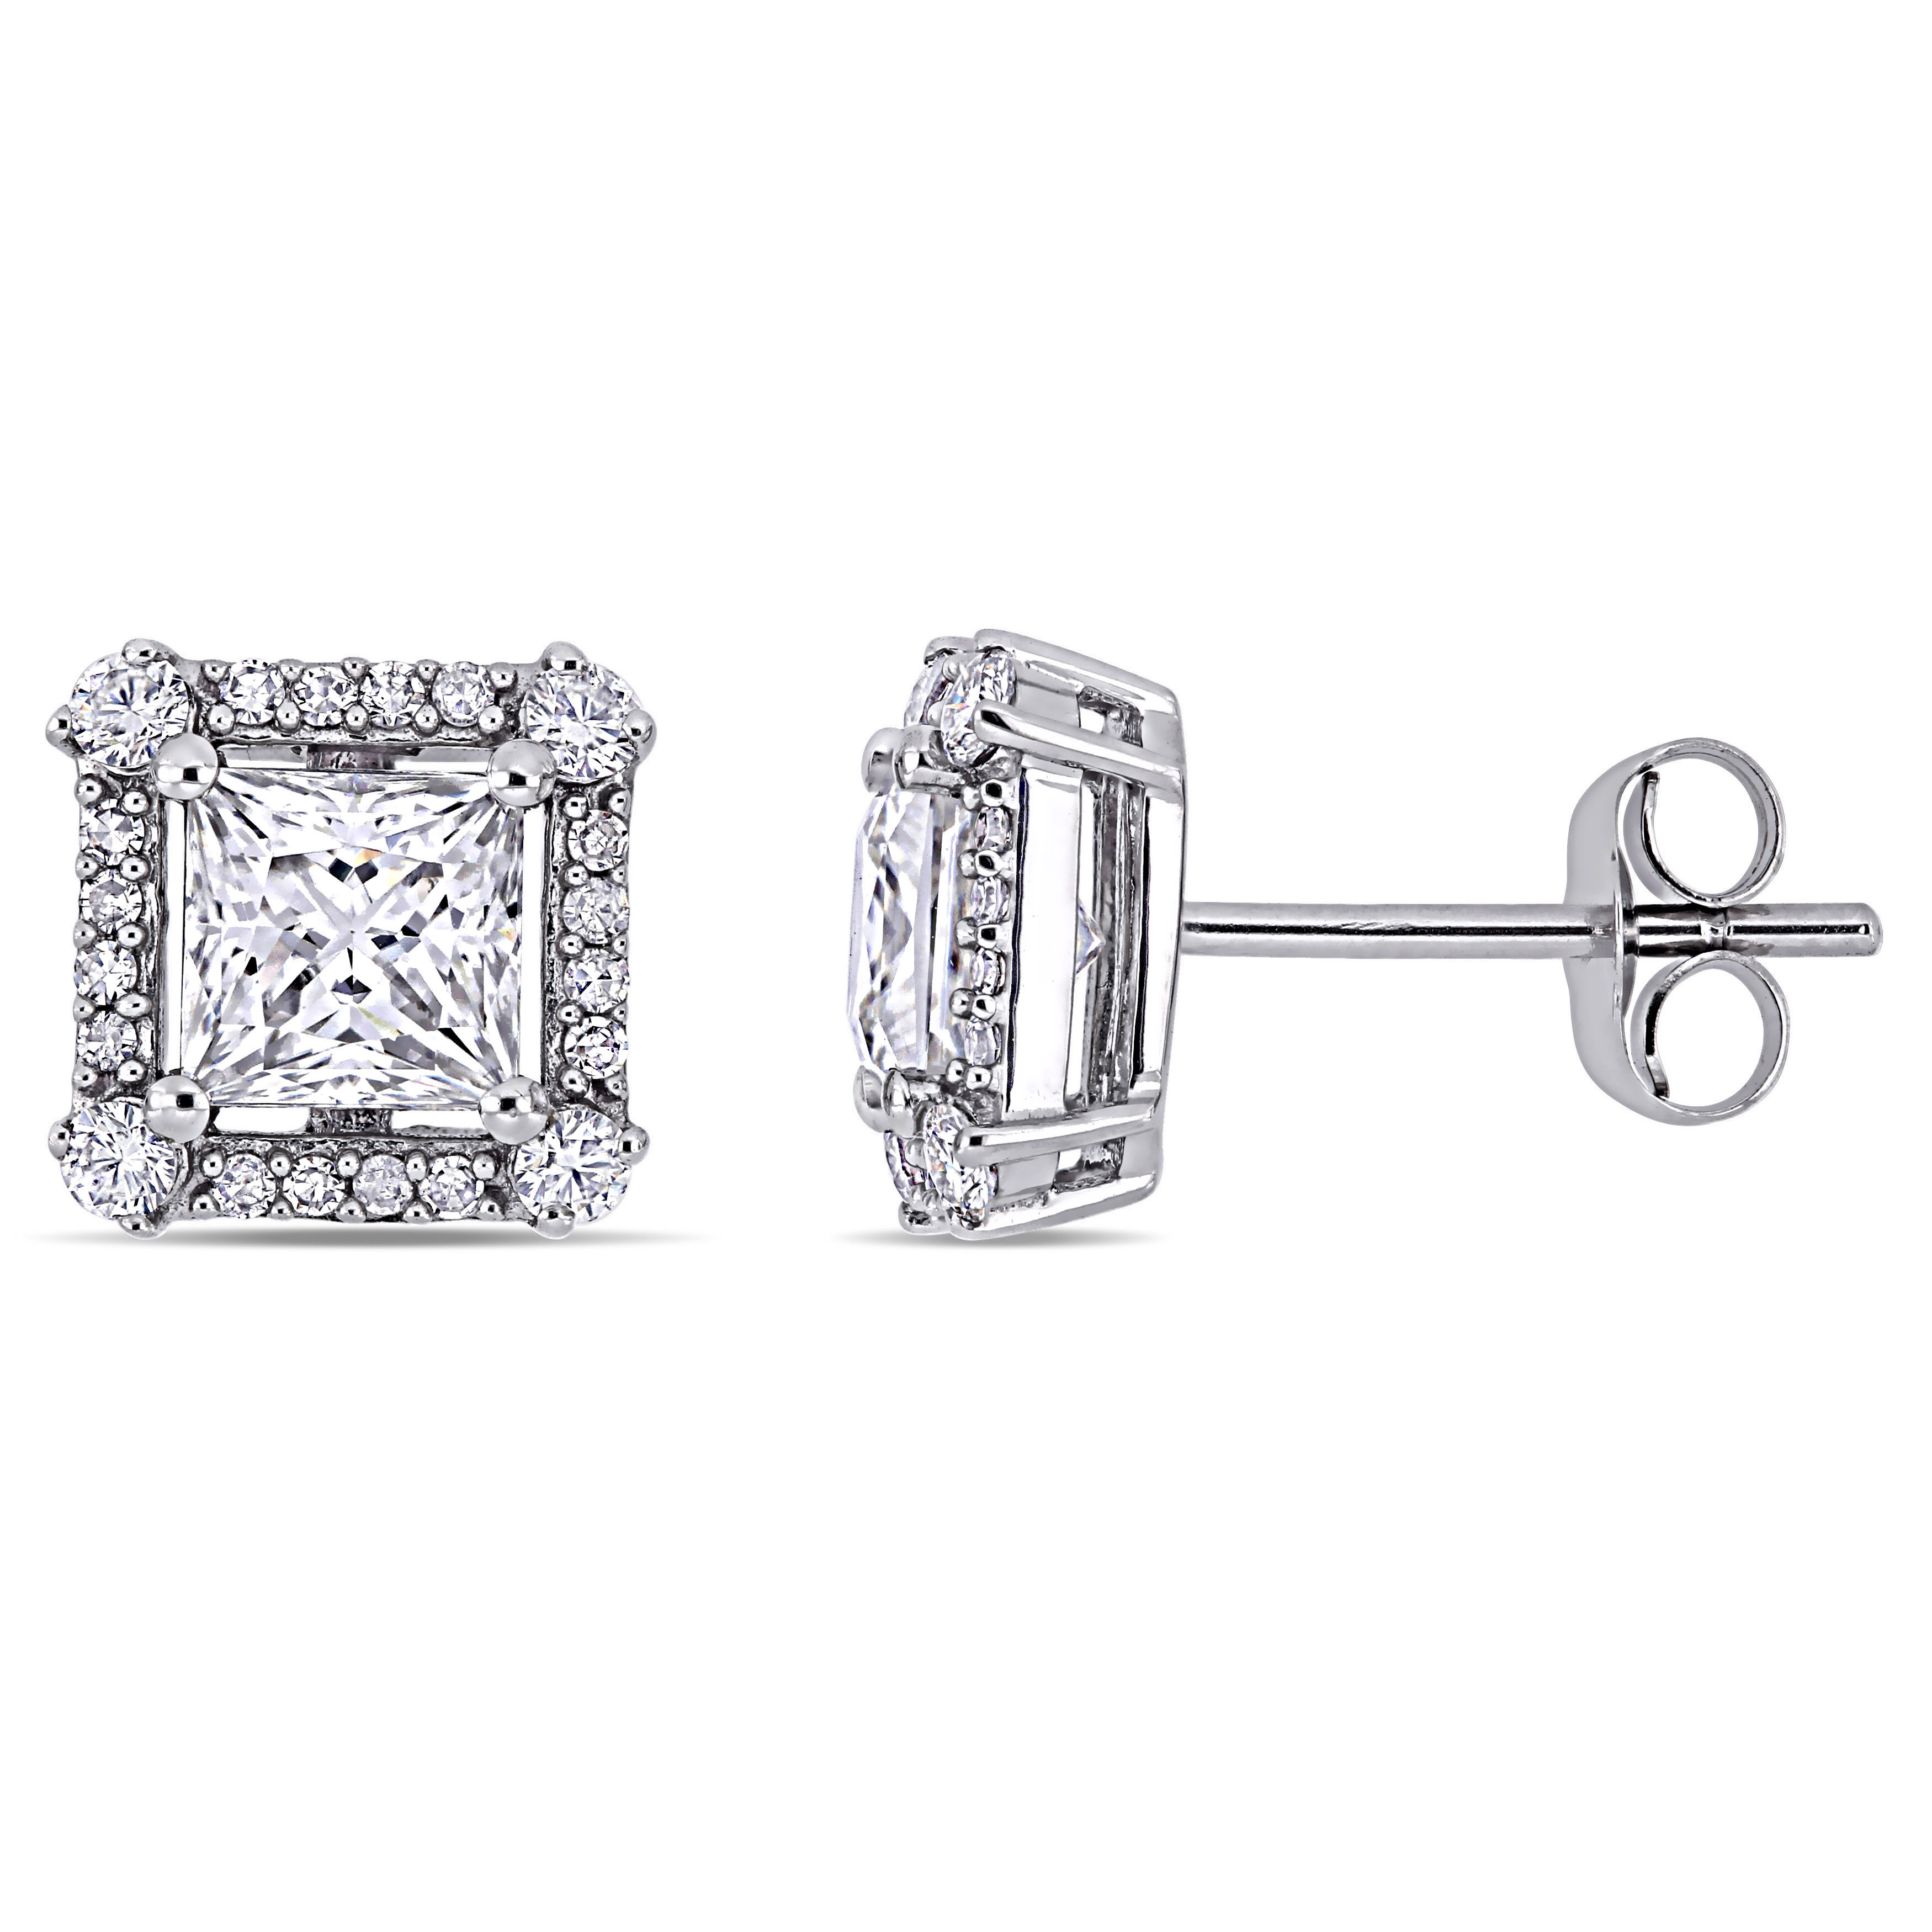 1 1/2 CT DEW Created Moissanite and 1/8 CT TW Diamond Princess-Cut Halo Stud Earring in 10k White Gold